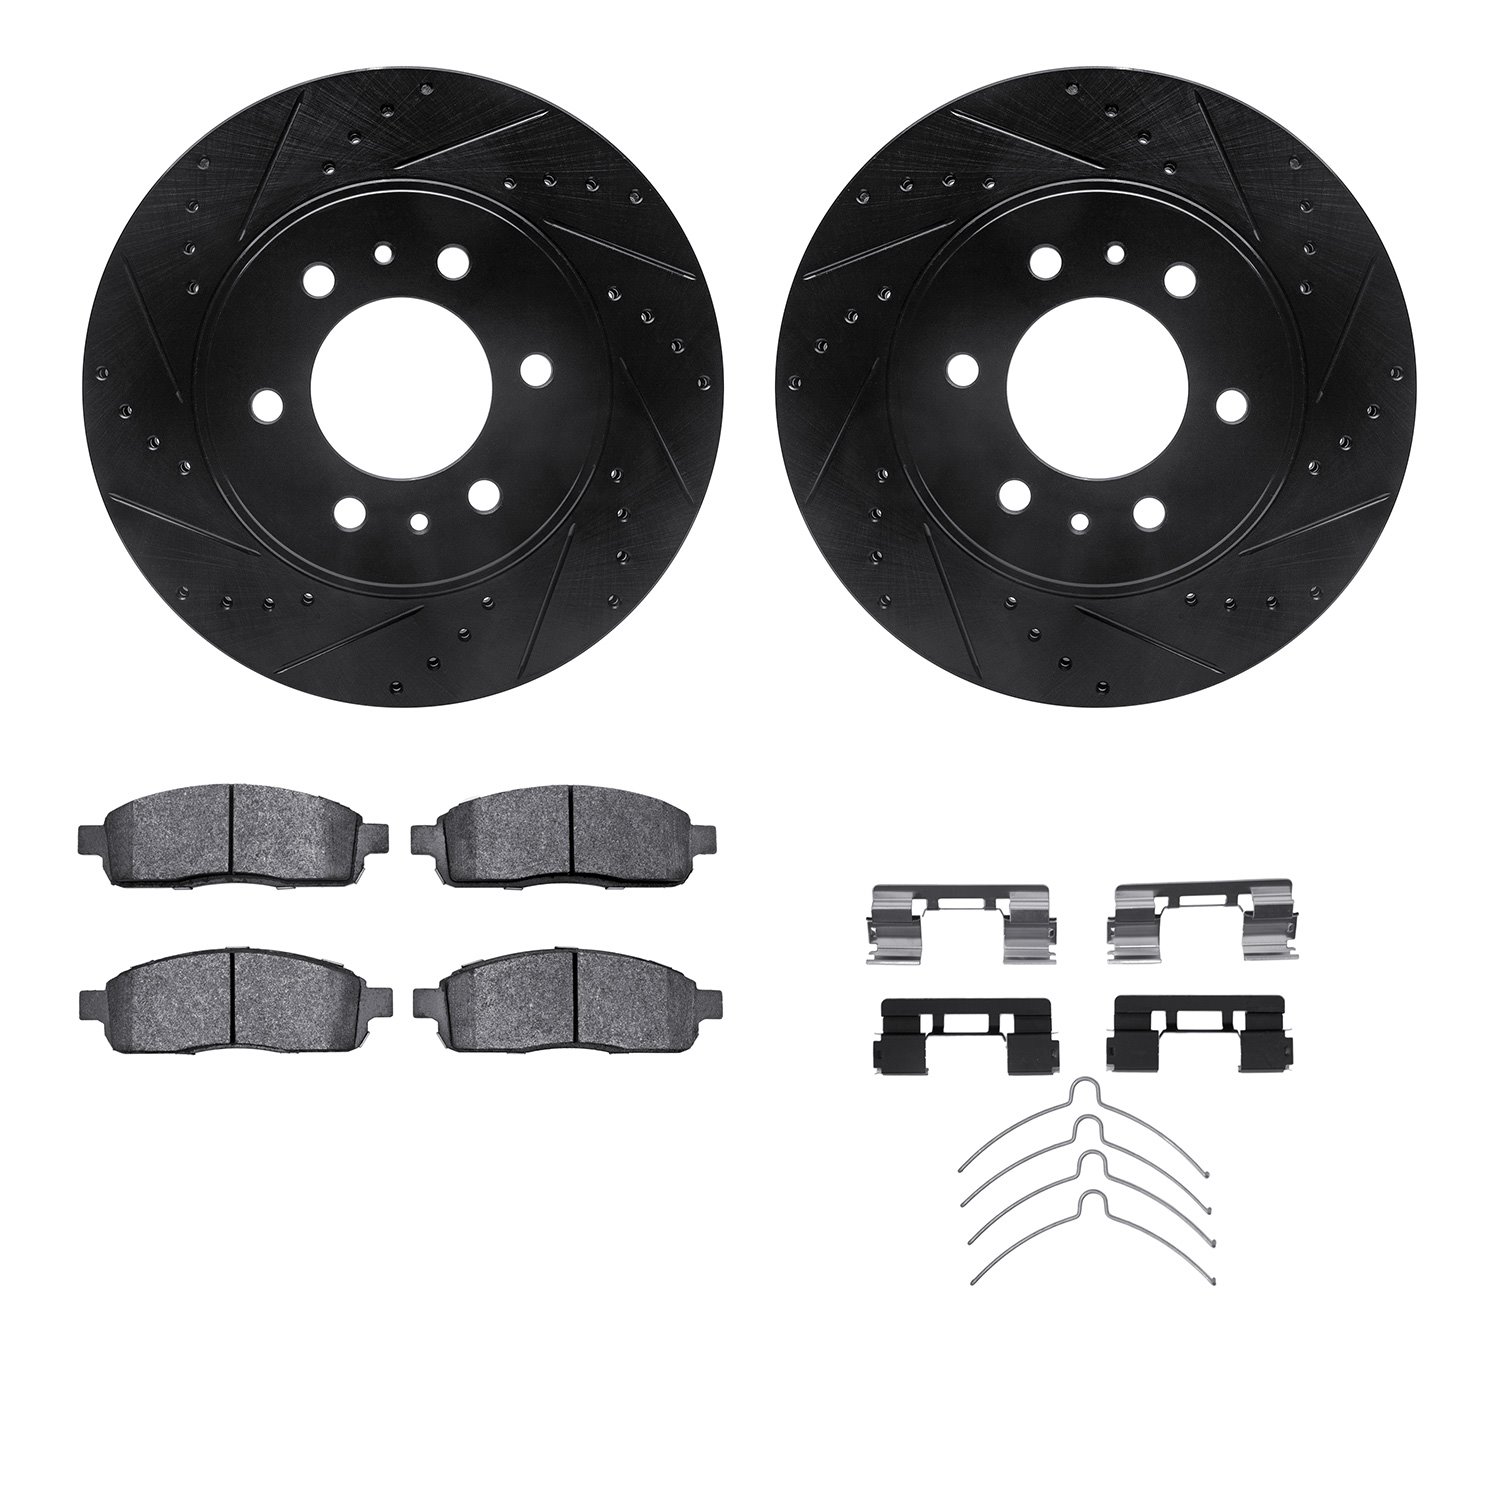 8412-54094 Drilled/Slotted Brake Rotors with Ultimate-Duty Brake Pads Kit & Hardware [Black], 2009-2009 Ford/Lincoln/Mercury/Maz